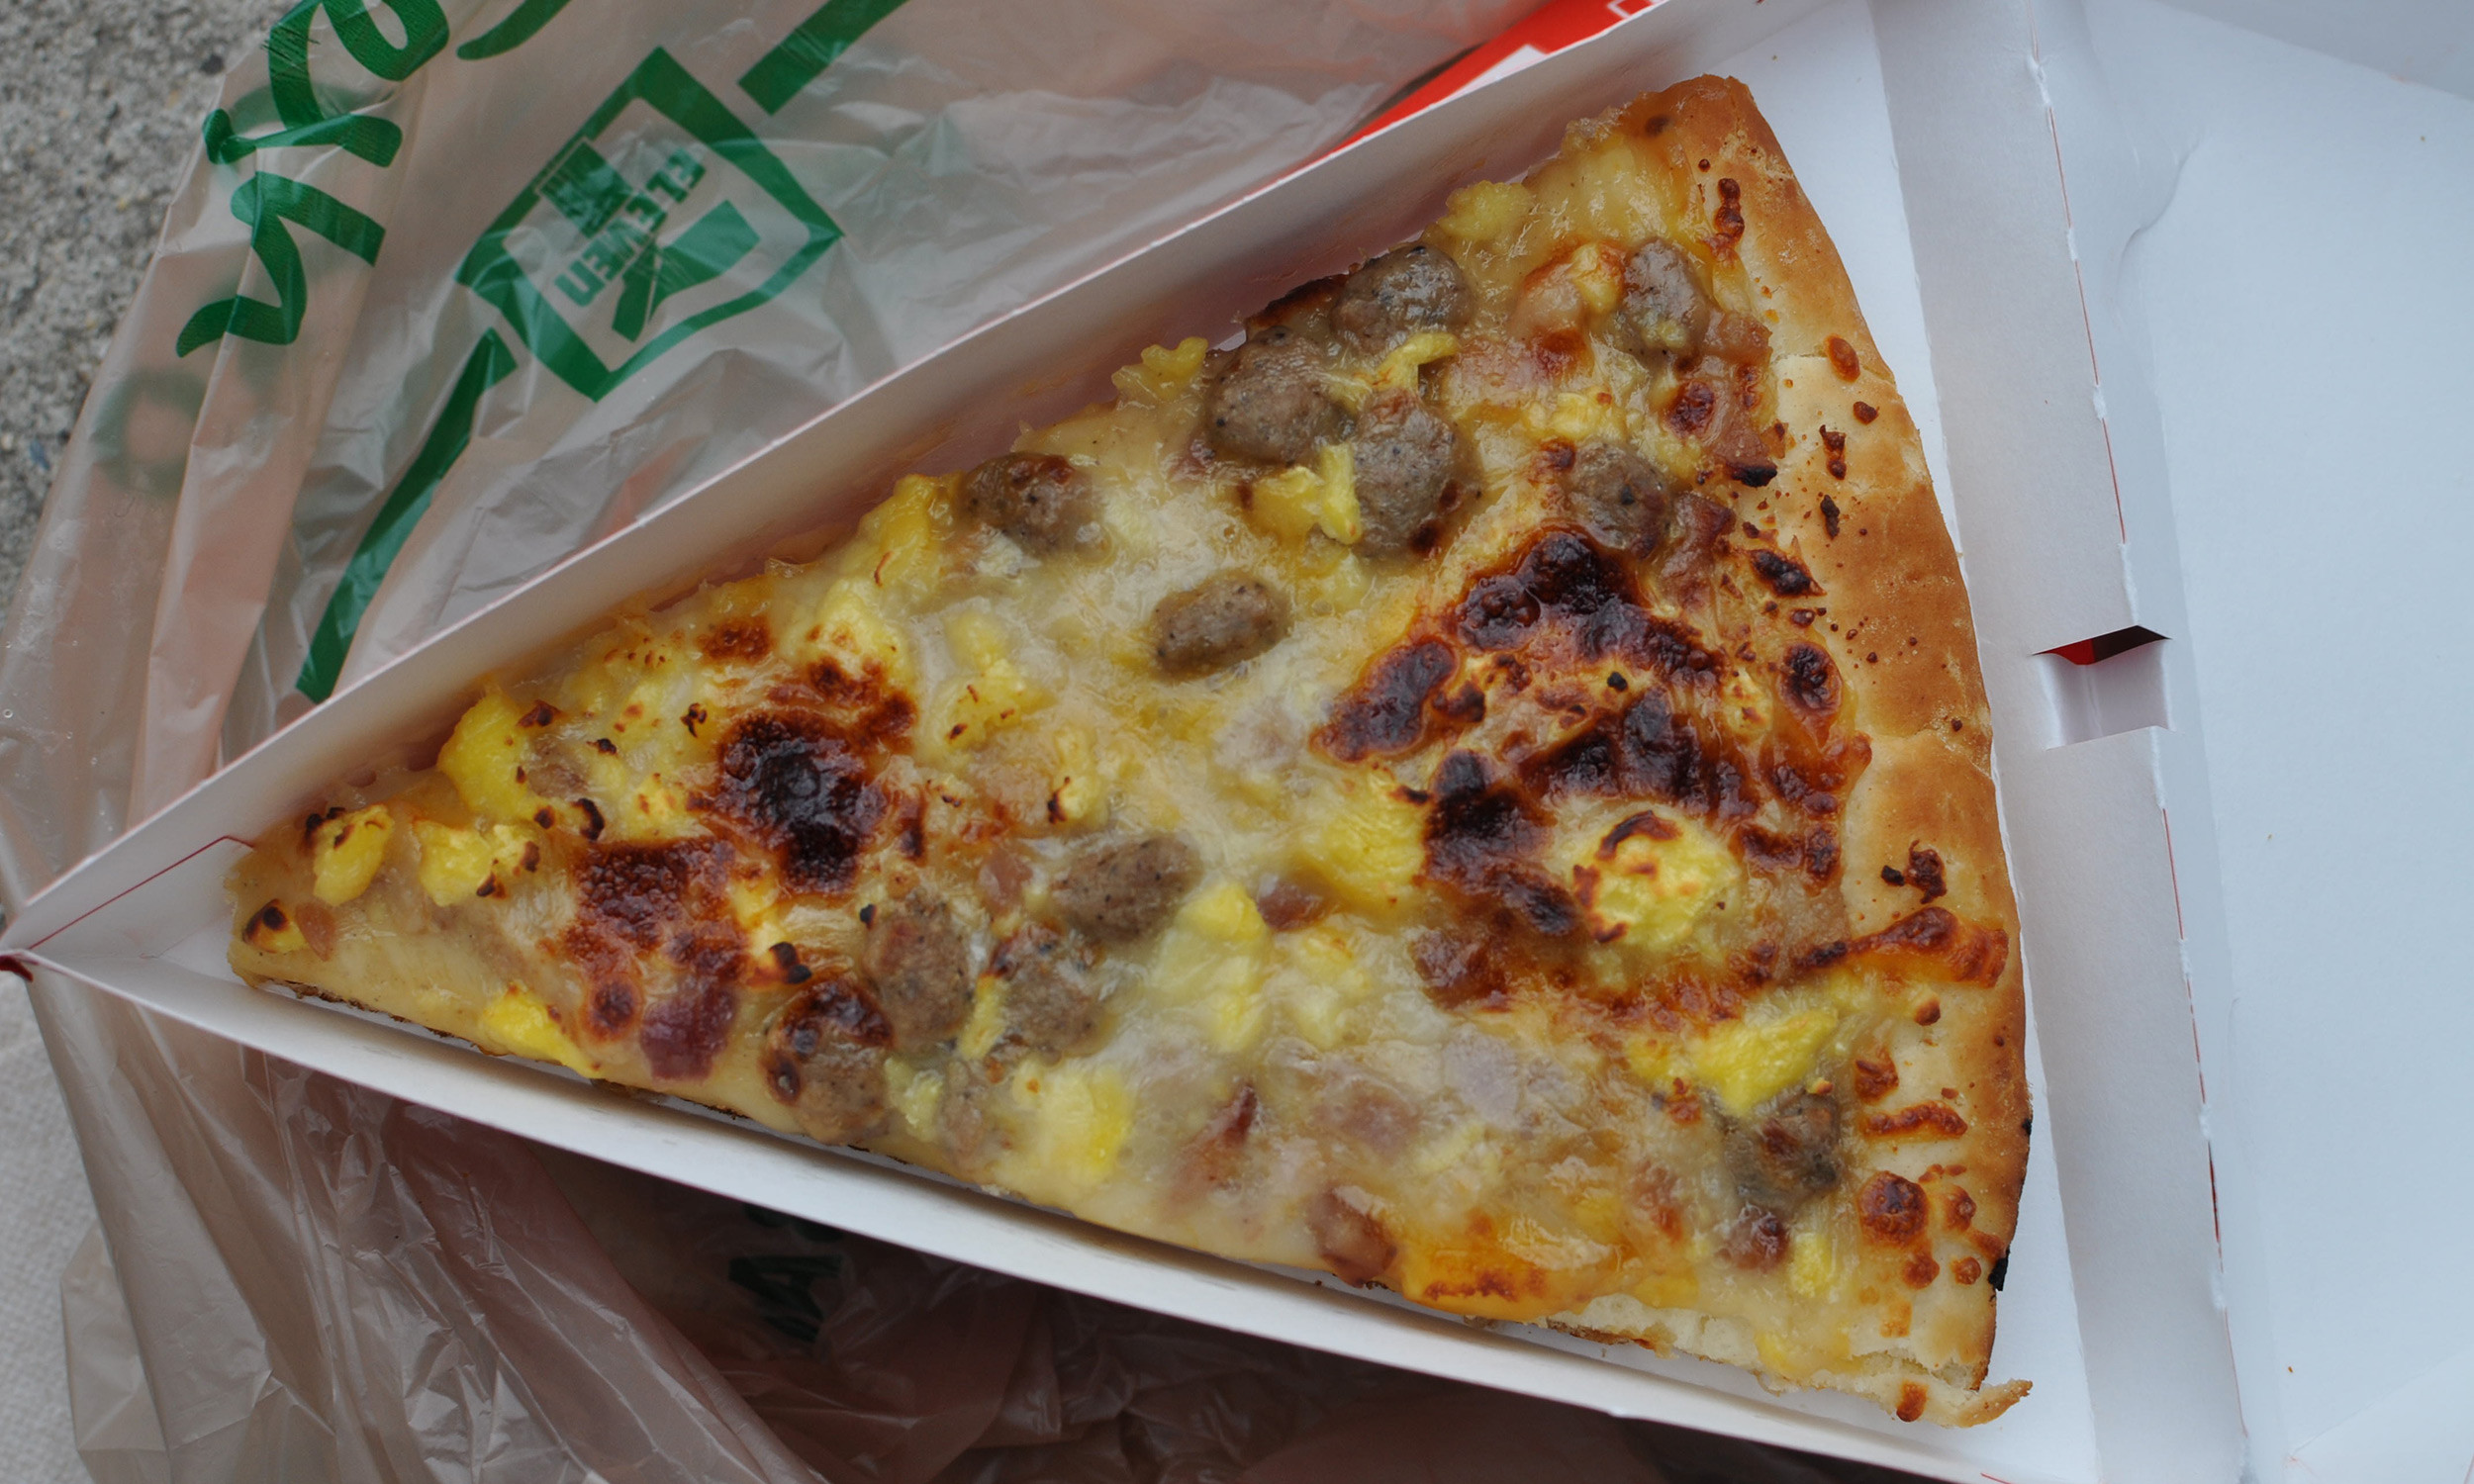 7 11 Breakfast Pizza Beautiful I Tracked Down A 7 Eleven Breakfast Pizza In the Wild and